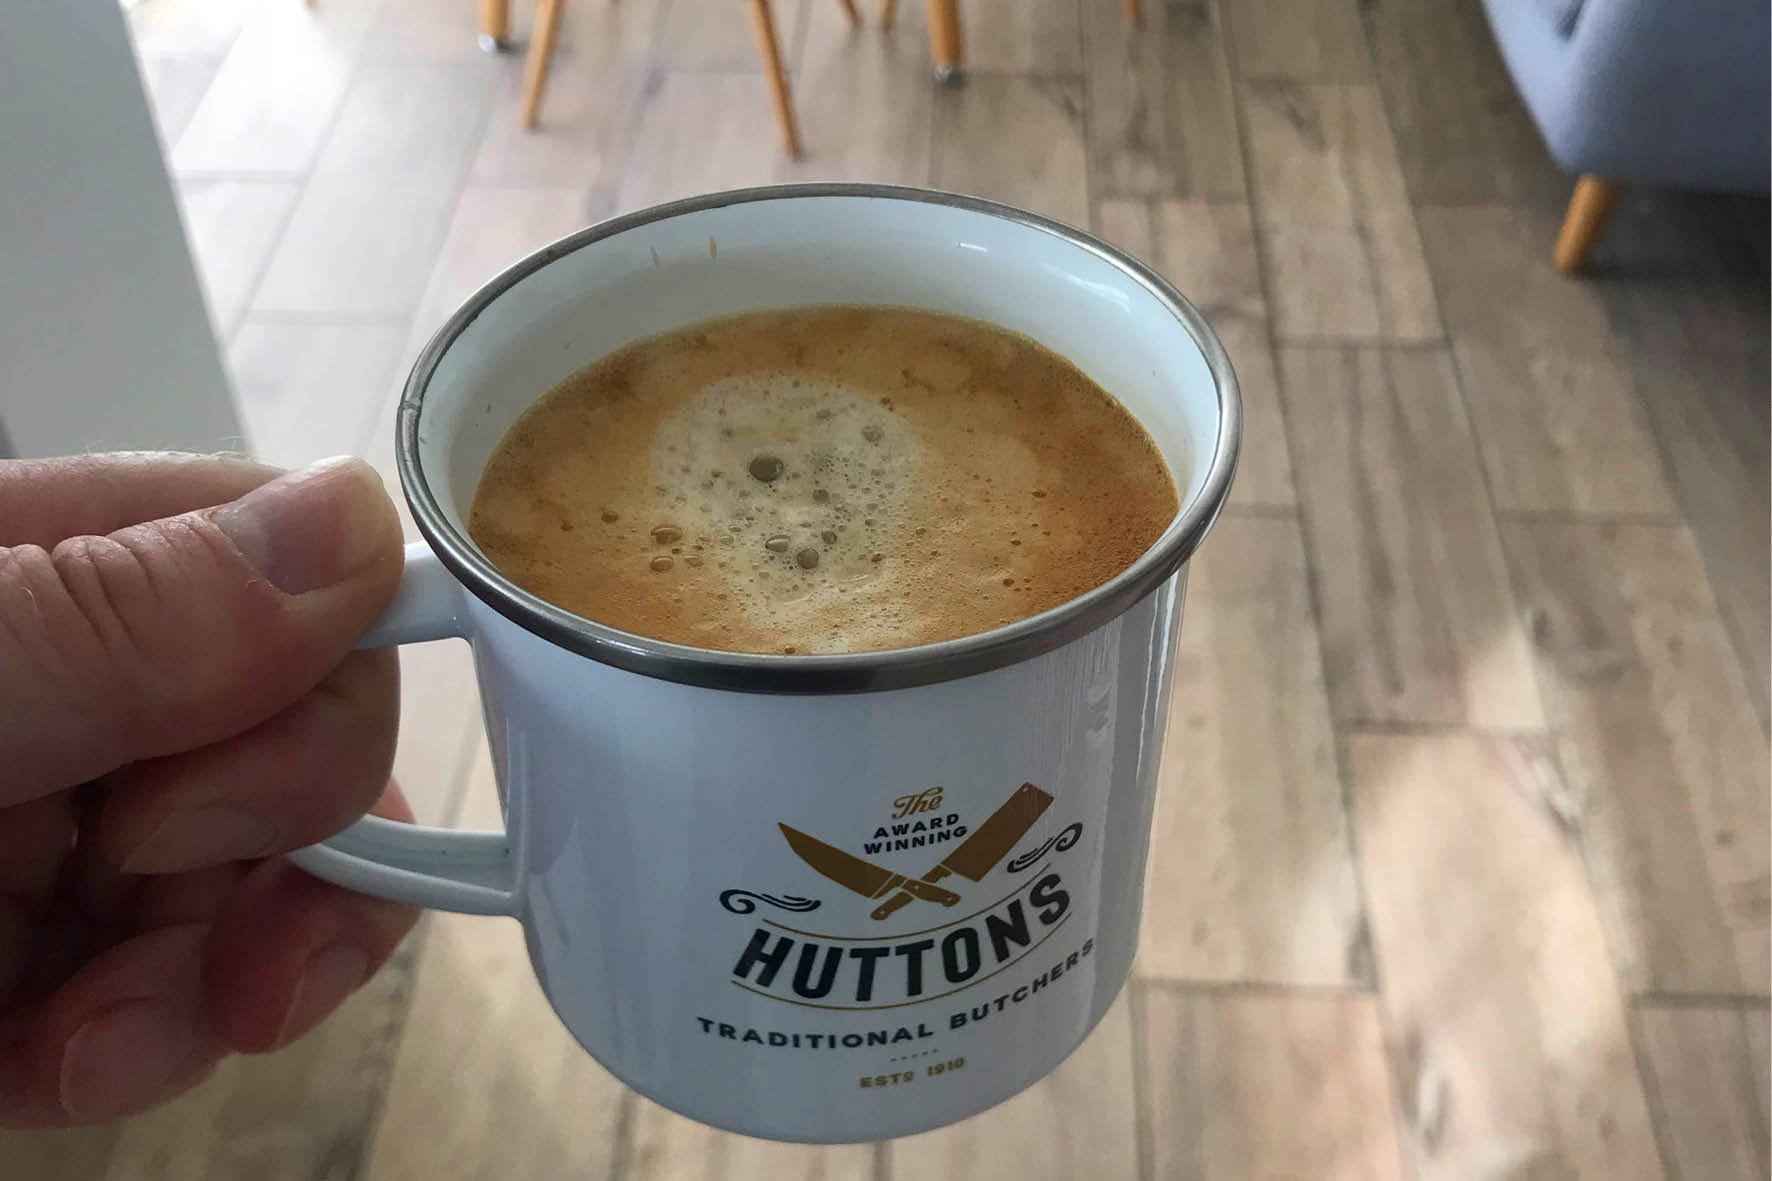 huttons_butchers_mugs_in_action_.jpg